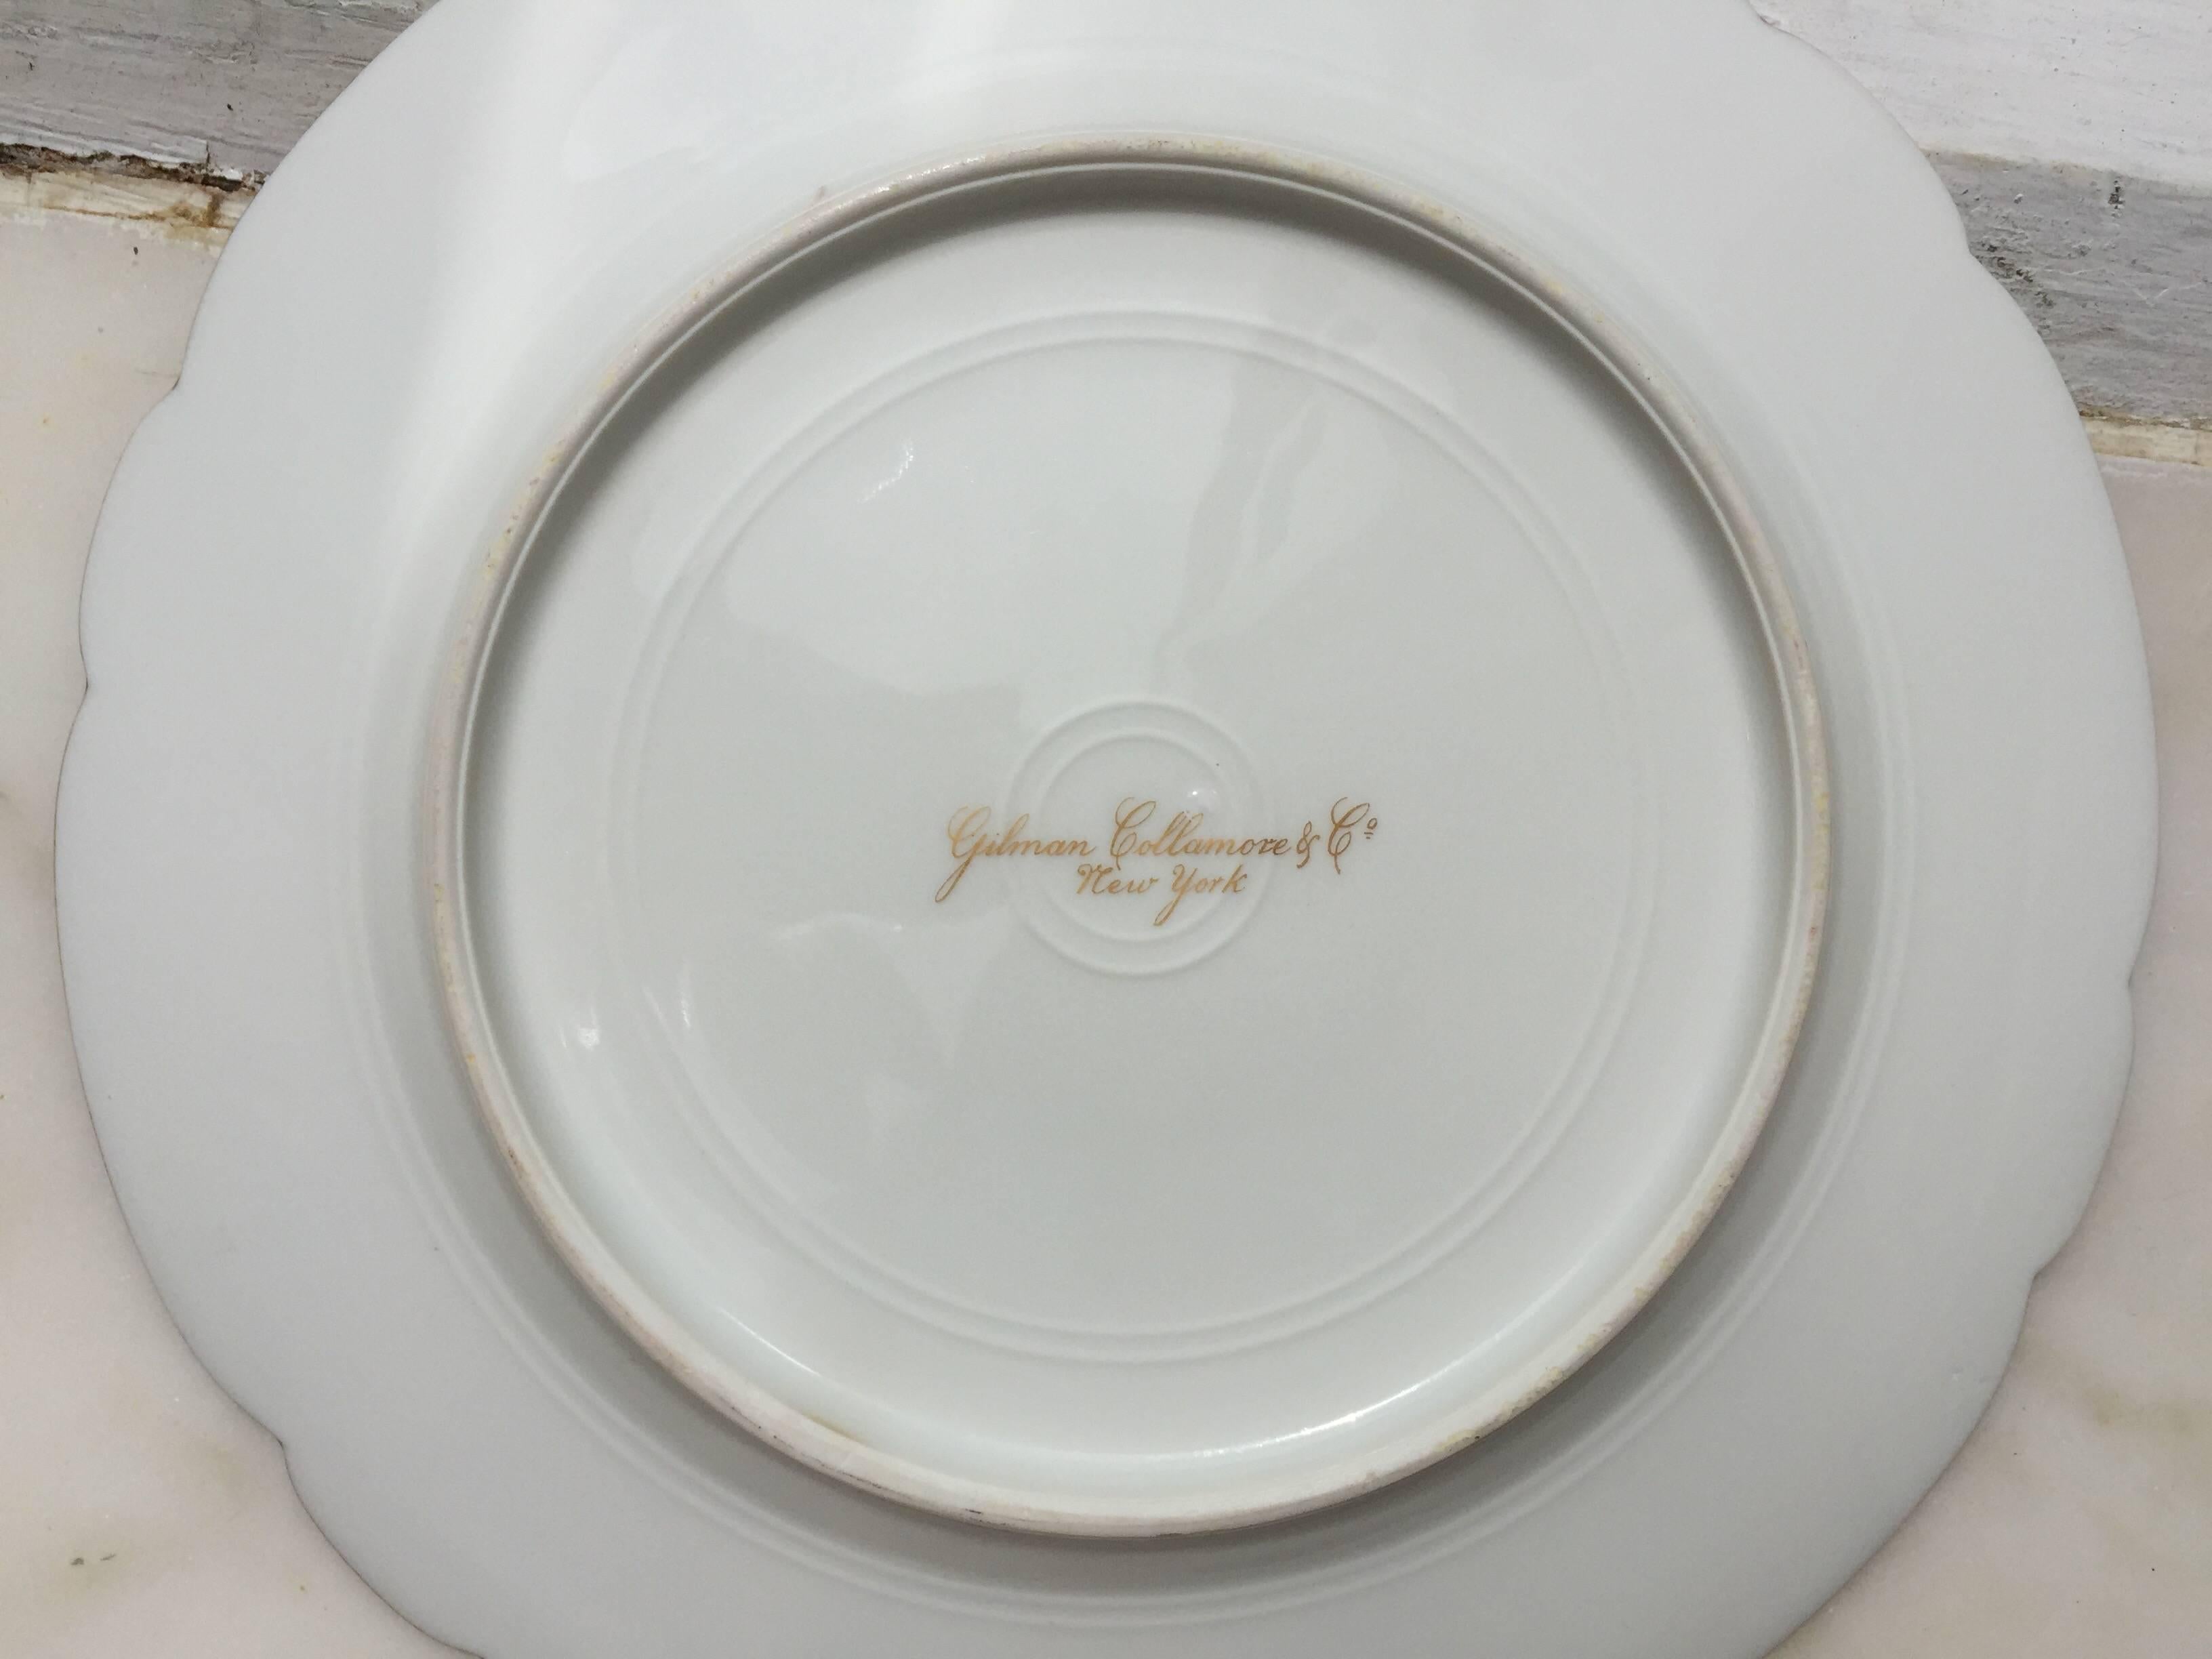 Neoclassical 12 Porcelain Plates with 24 Karat Gold Border